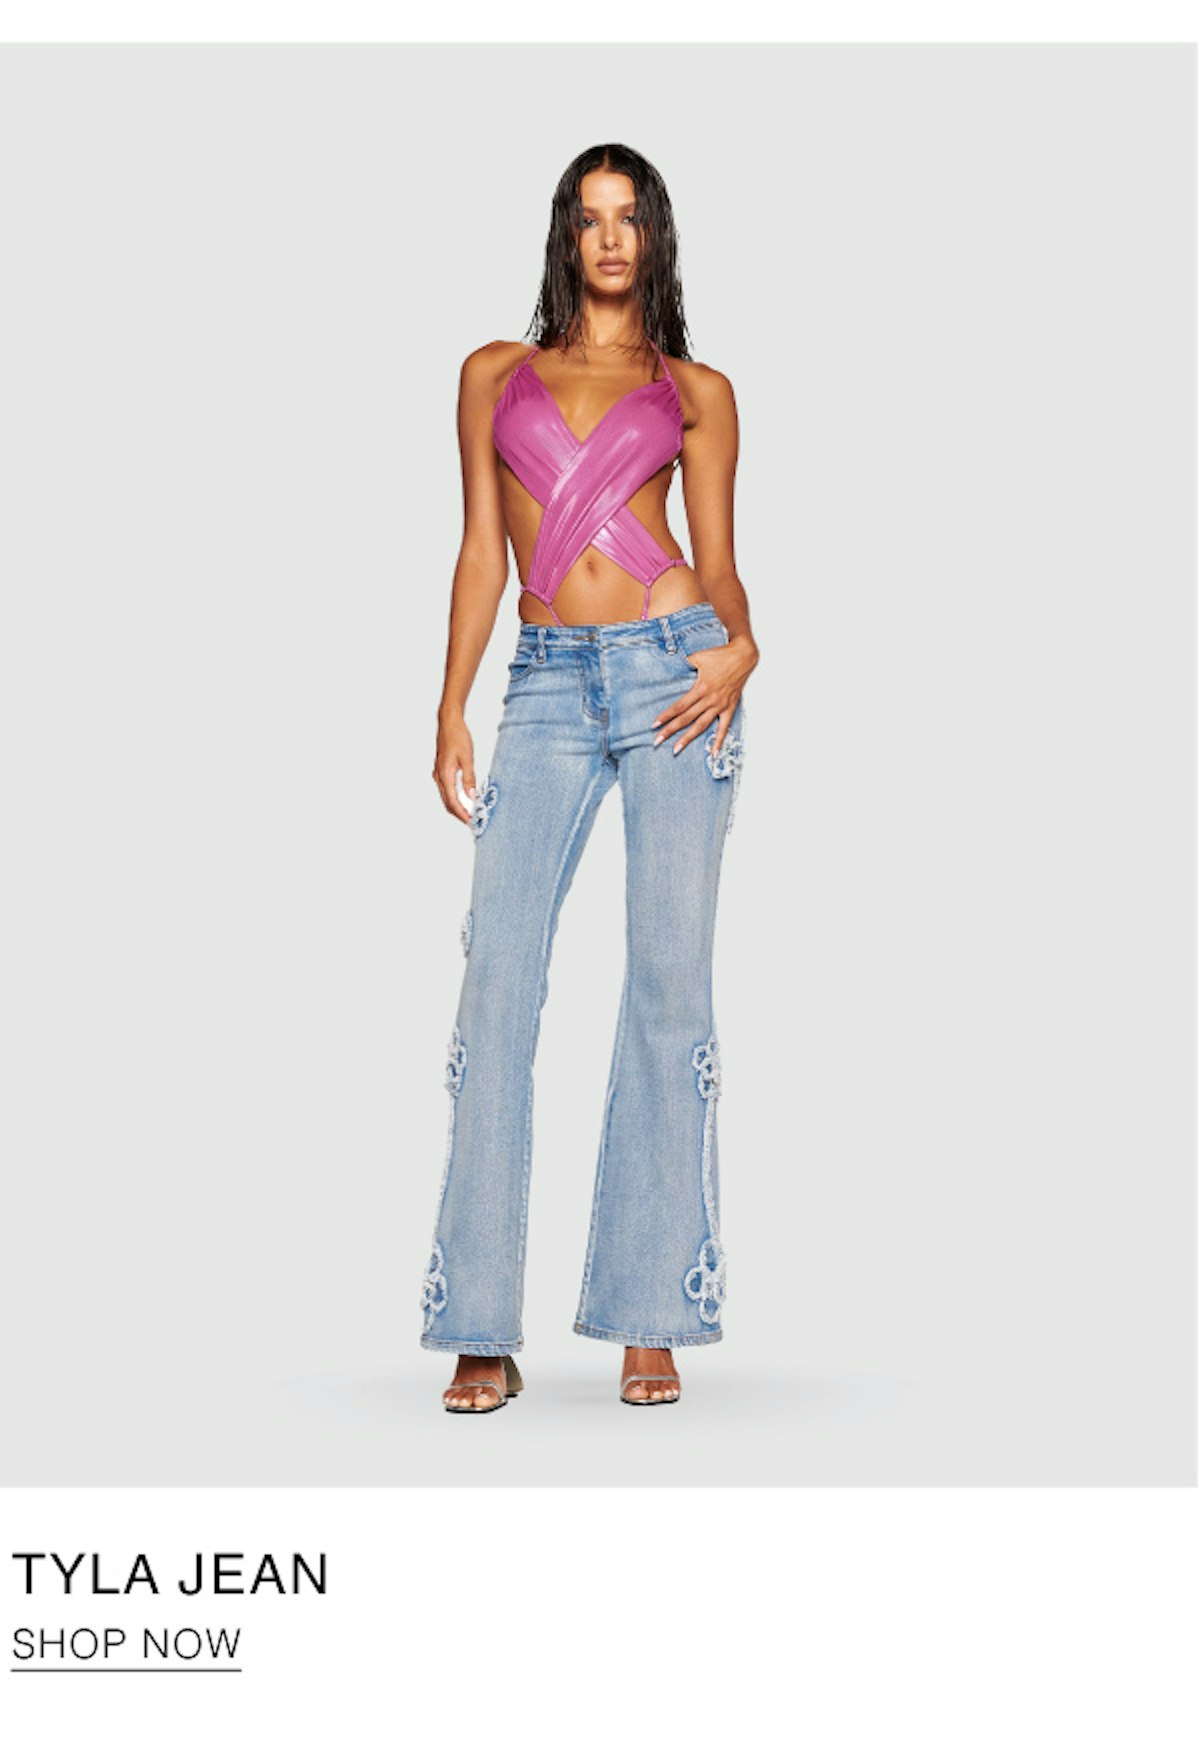 Model wearing pink bodysuit and flared jeans standing in front of grey background.